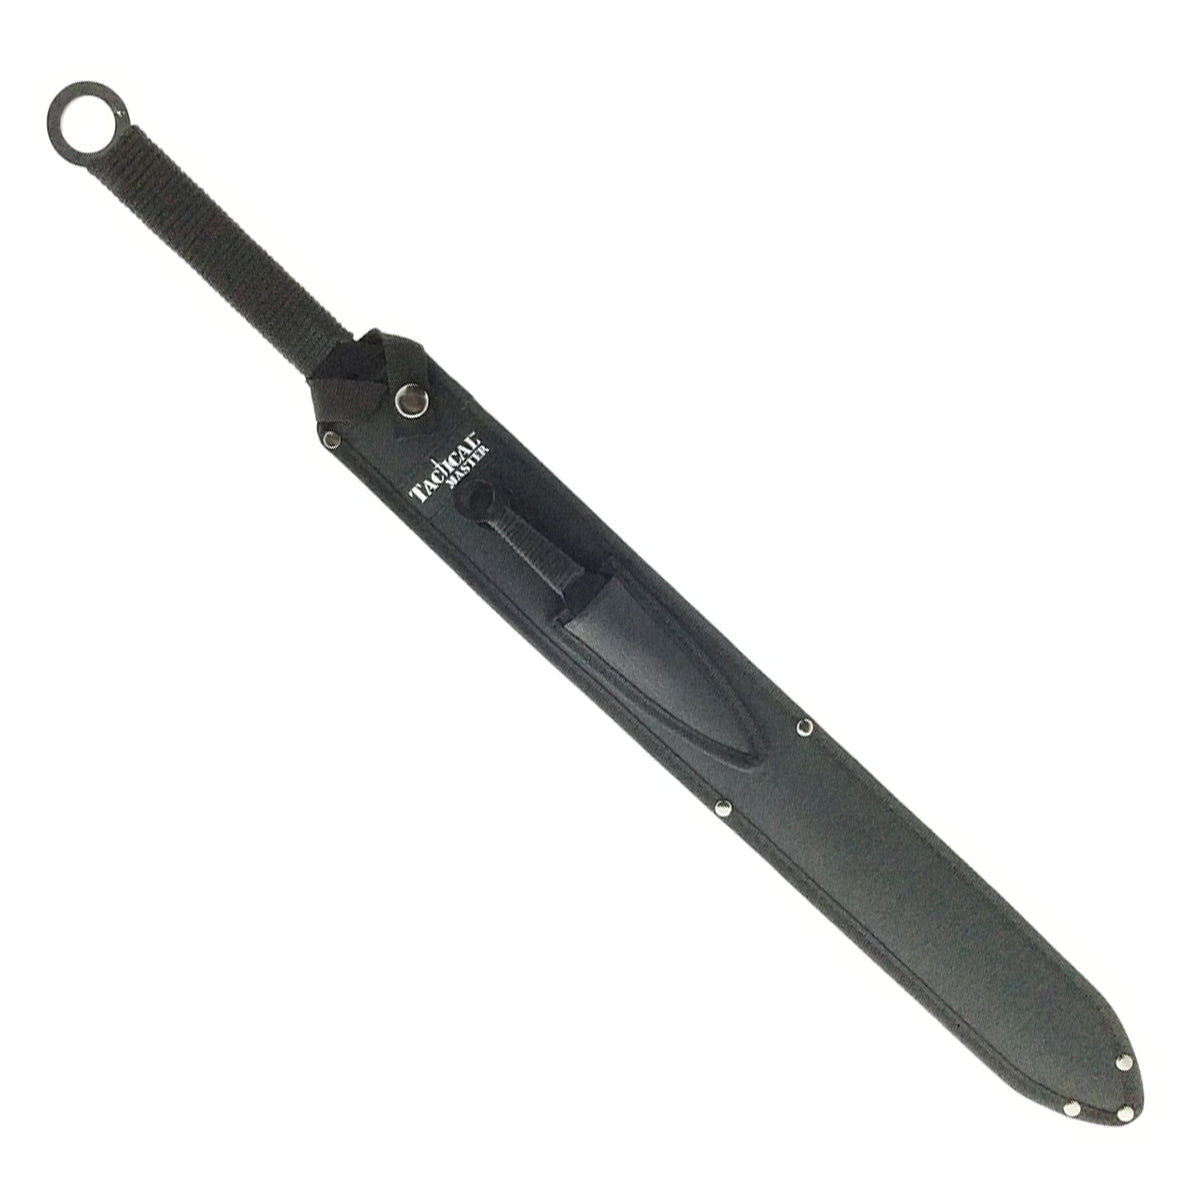 27" Machete with 2 pcs 6" throwing knife, TACTICAL MASTER